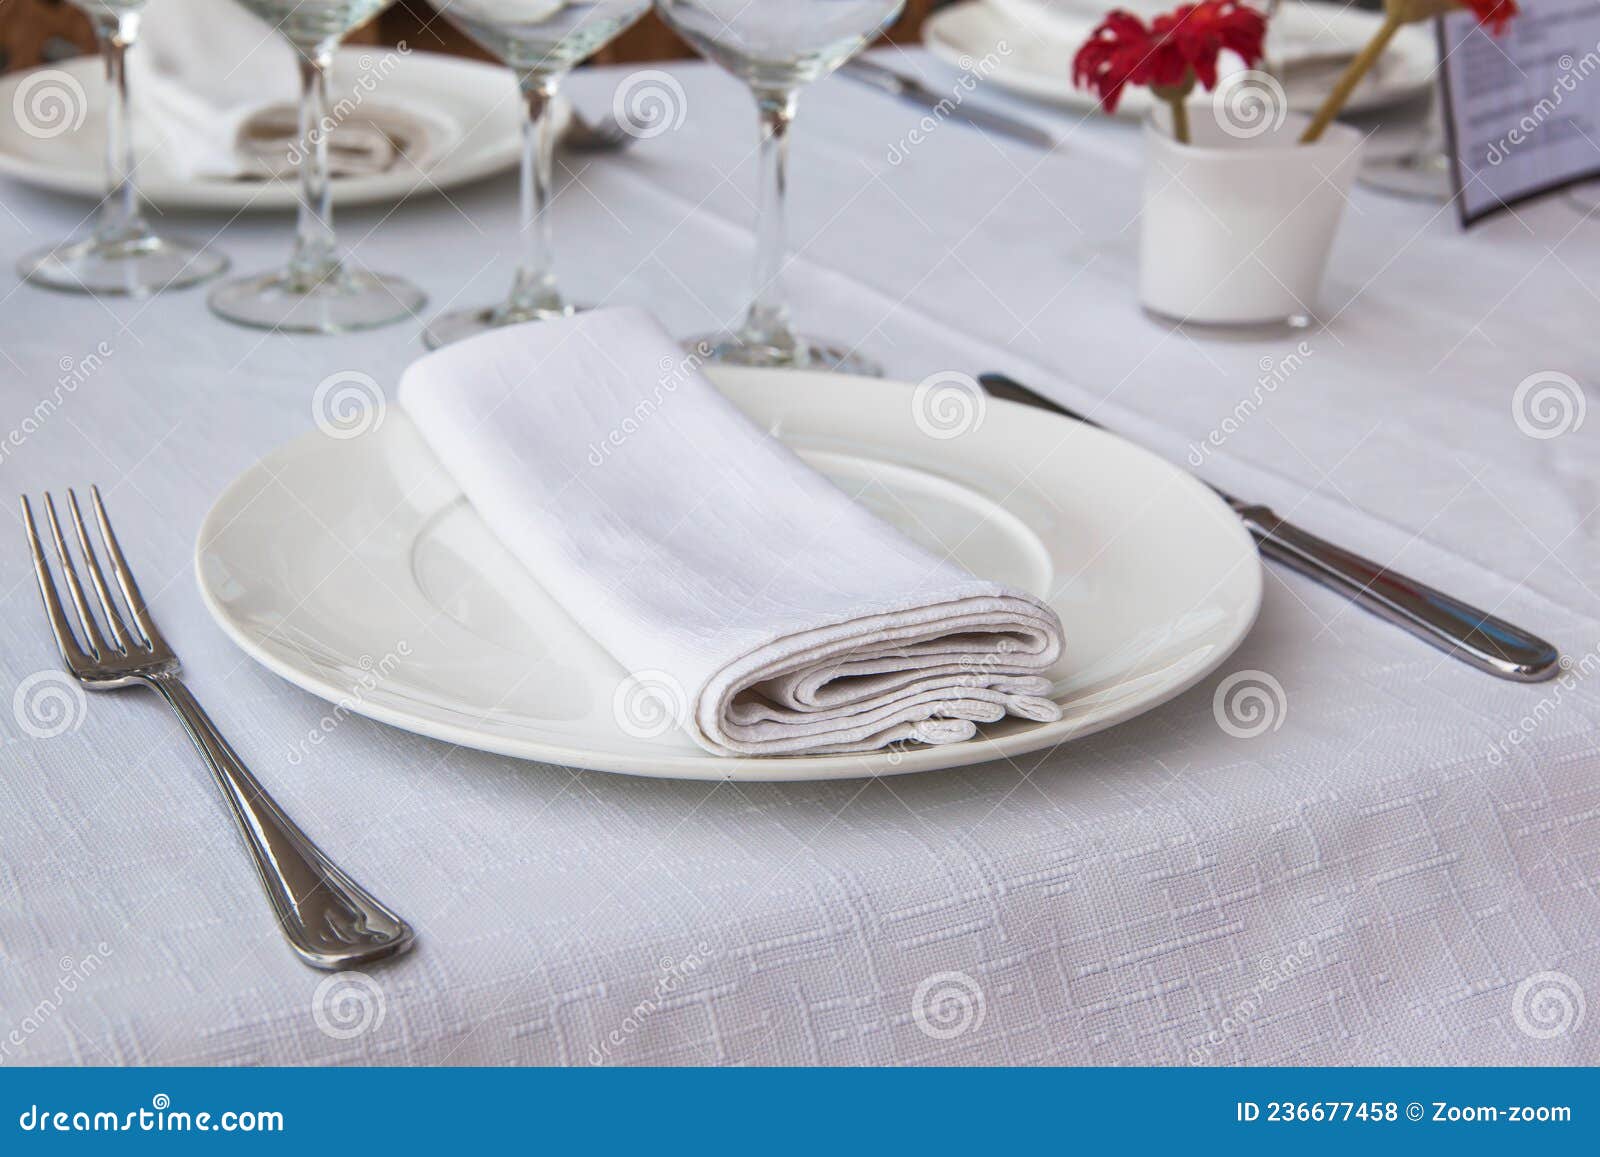 table setting with plate